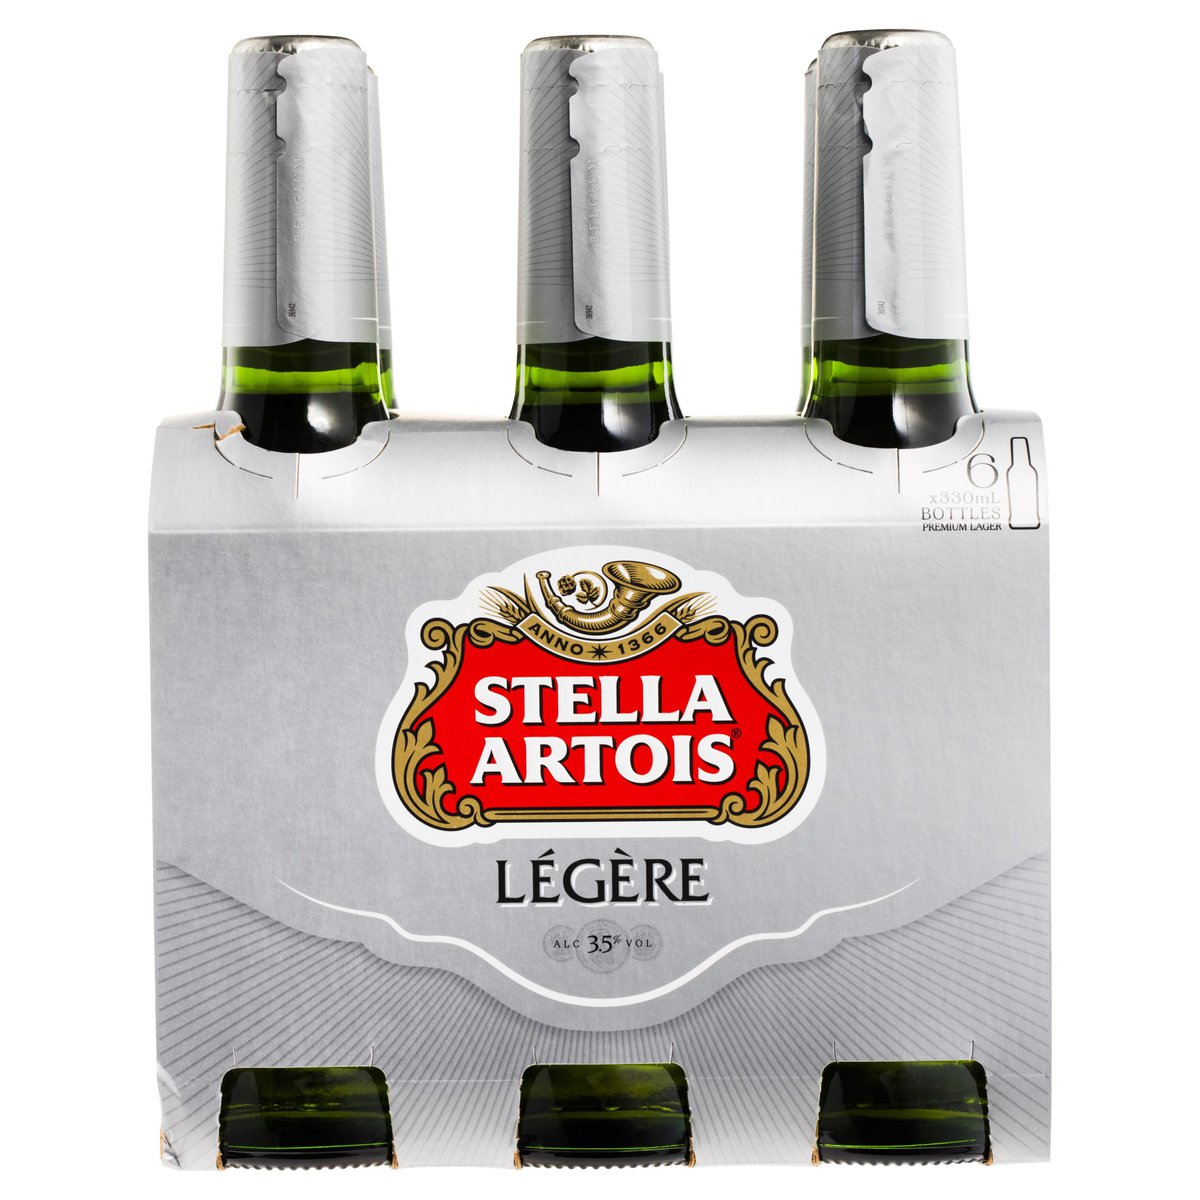 Stella artois beer six pack product photography